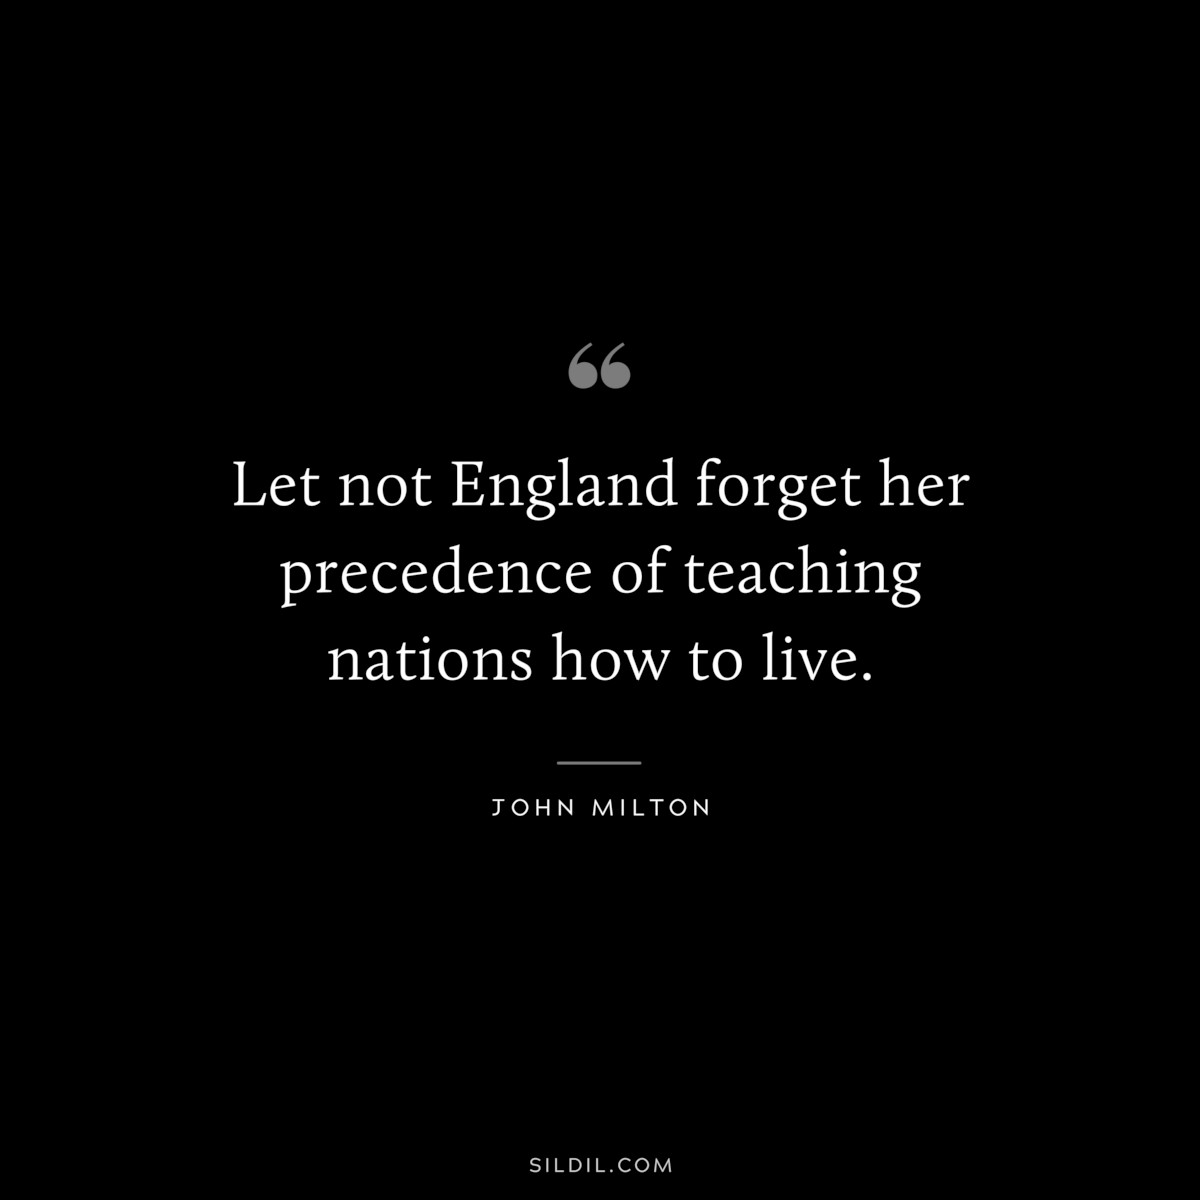 Let not England forget her precedence of teaching nations how to live. ― John Milton